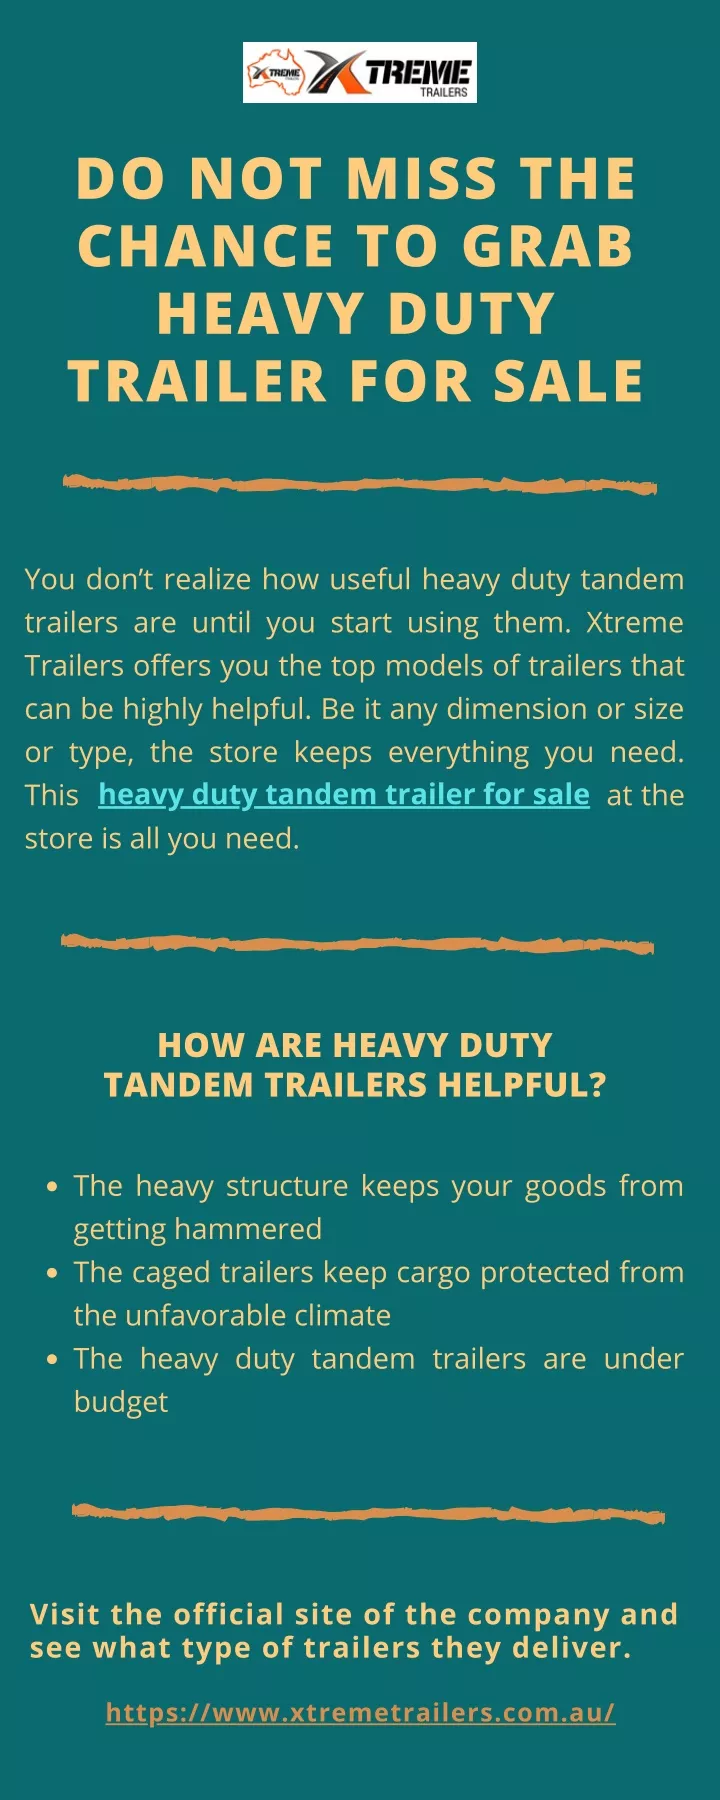 do not miss the chance to grab heavy duty trailer